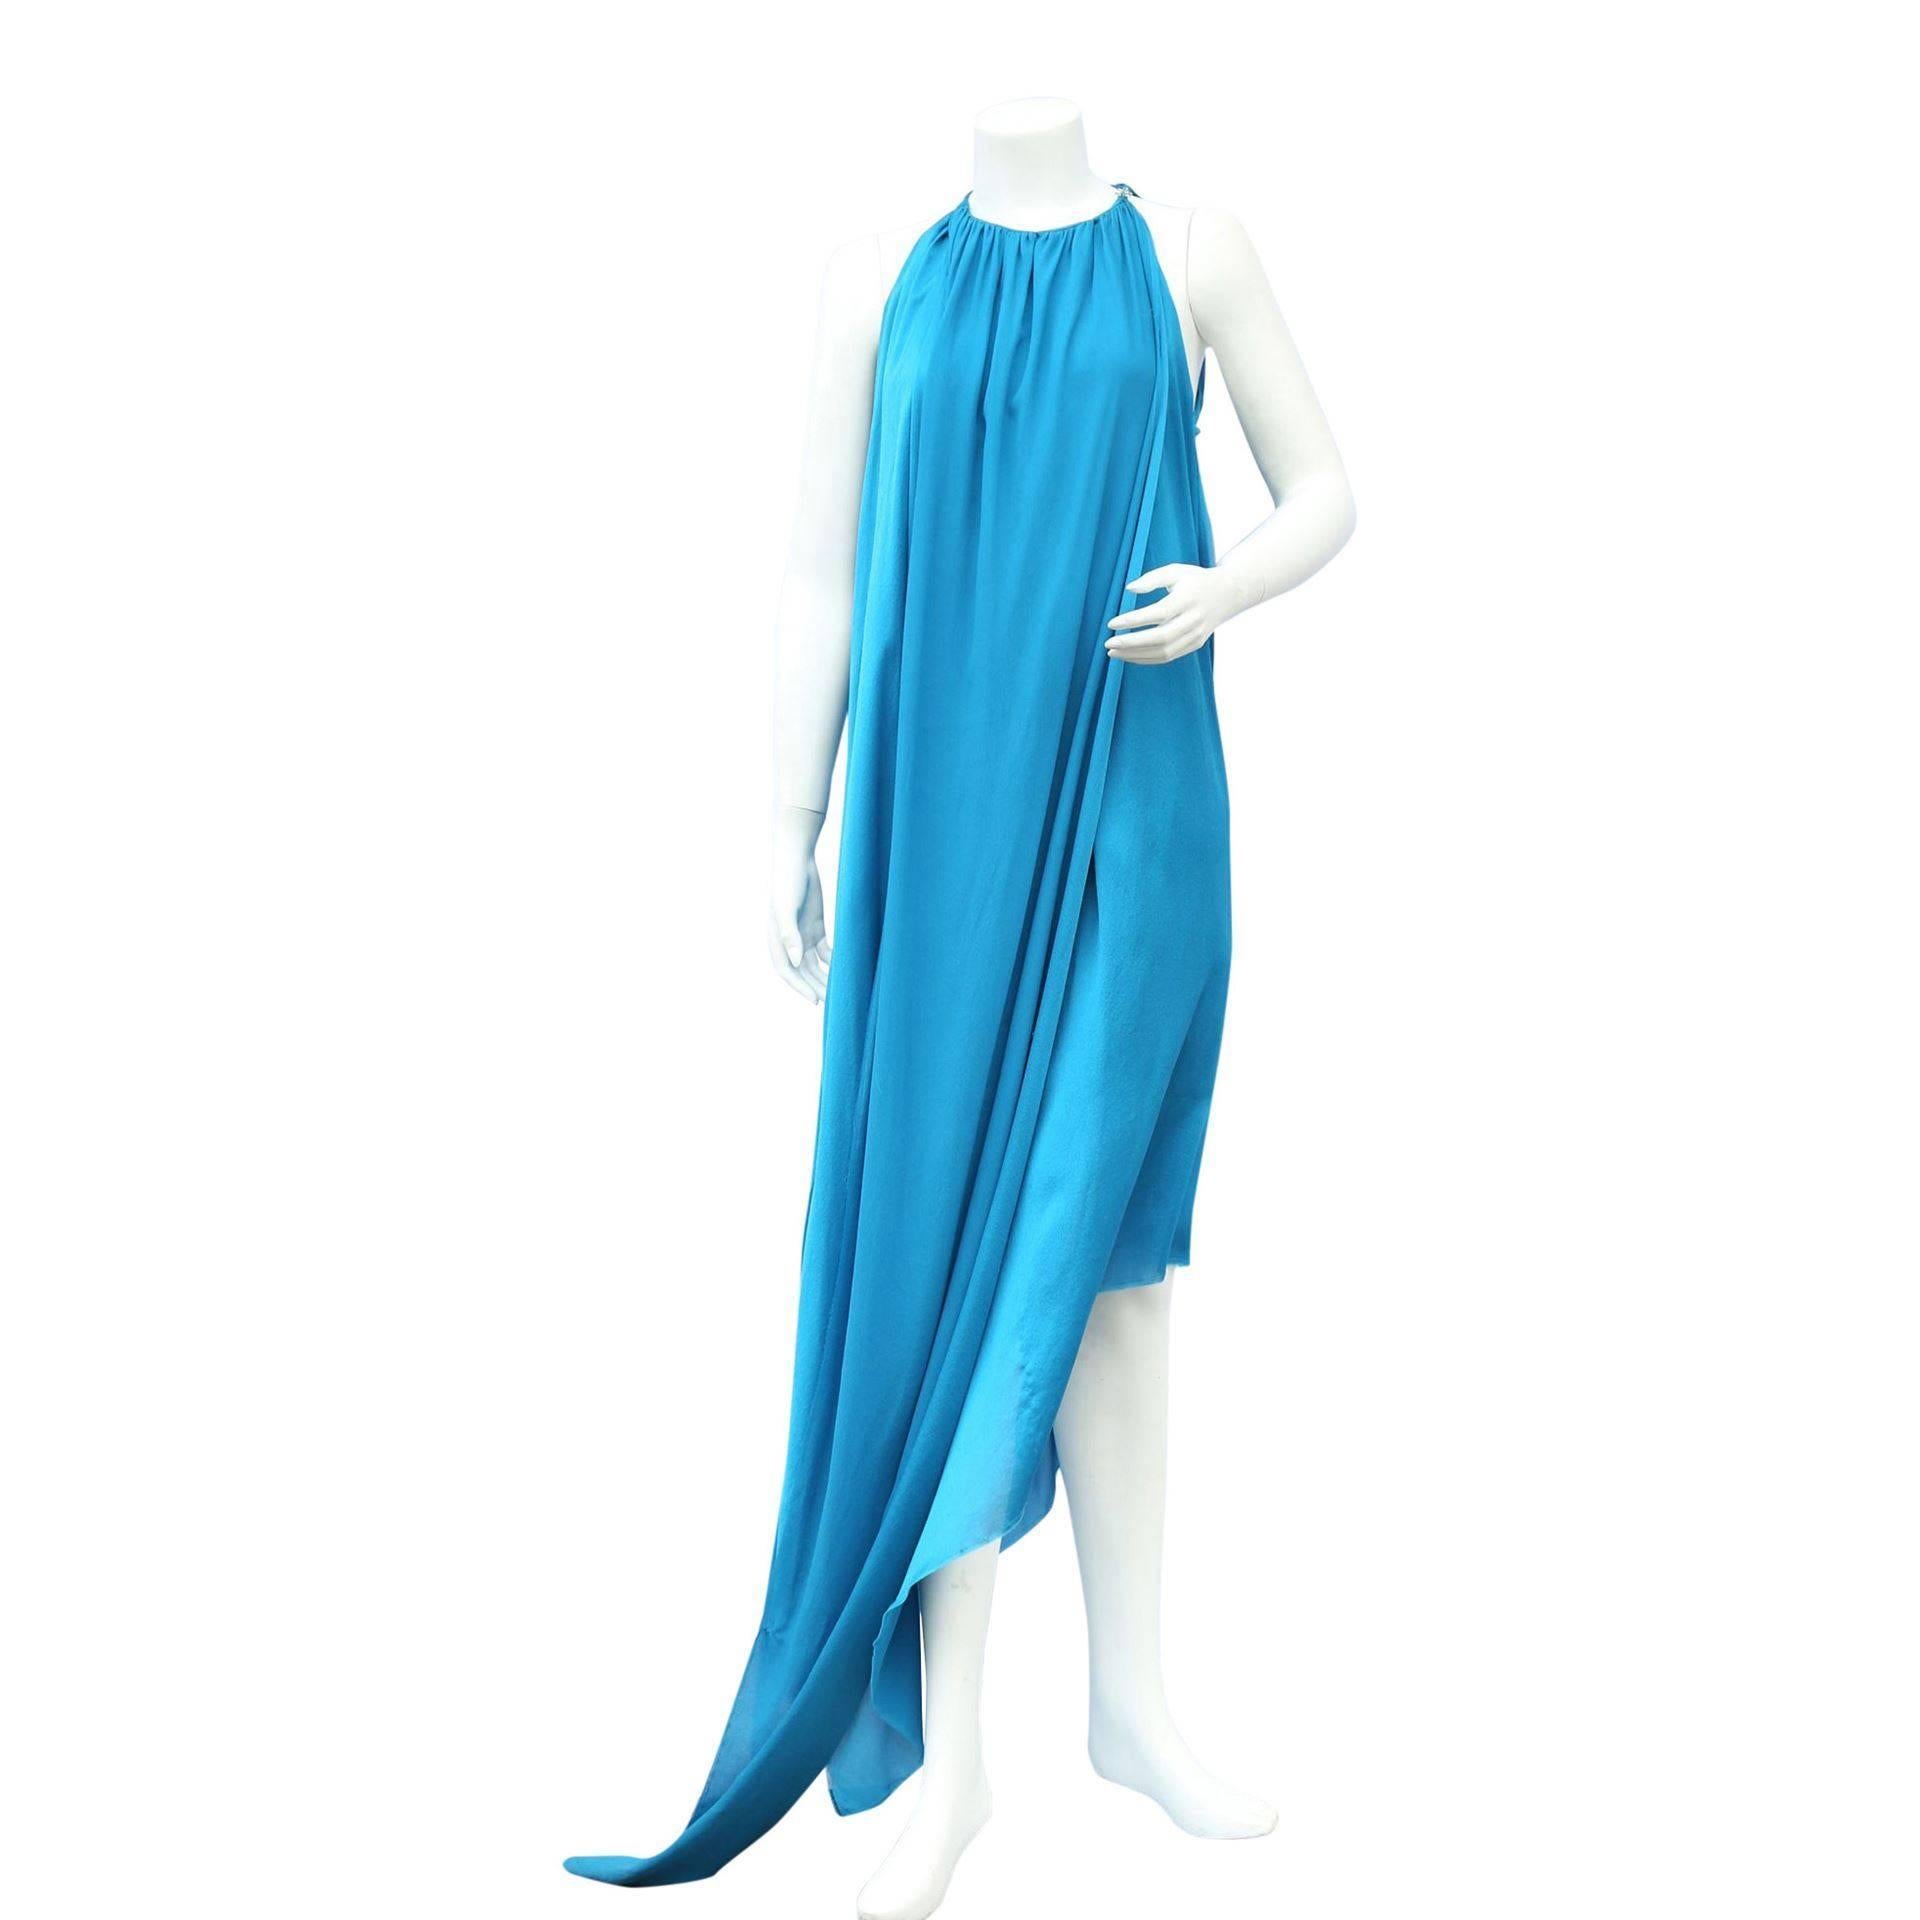 Lanvin Electric blue silk dress with ring neck that hocks on the side with a sliver clasp and falls to the floor, which is cut on a angle. 

Measurements taken flat in inches
Bust – 19
Waist – 29
Hips – 33 
Length on main hem  57
Length on